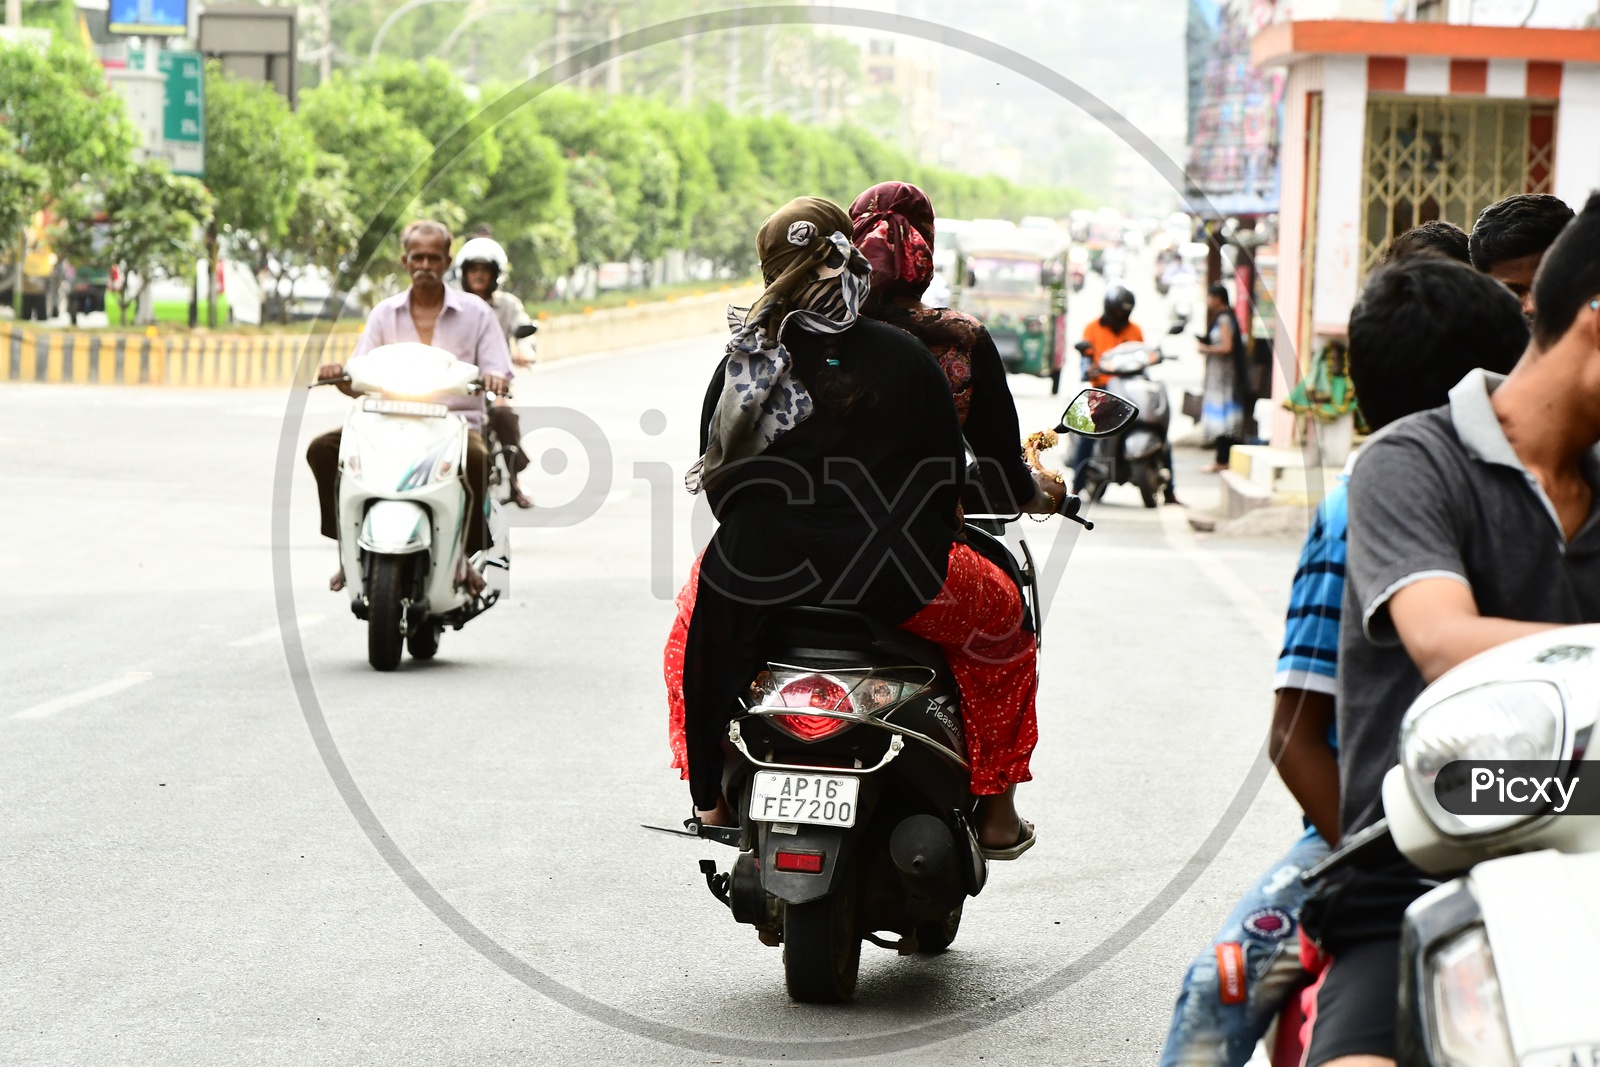 Indian Women wearing scarfs and riding scooters on the road